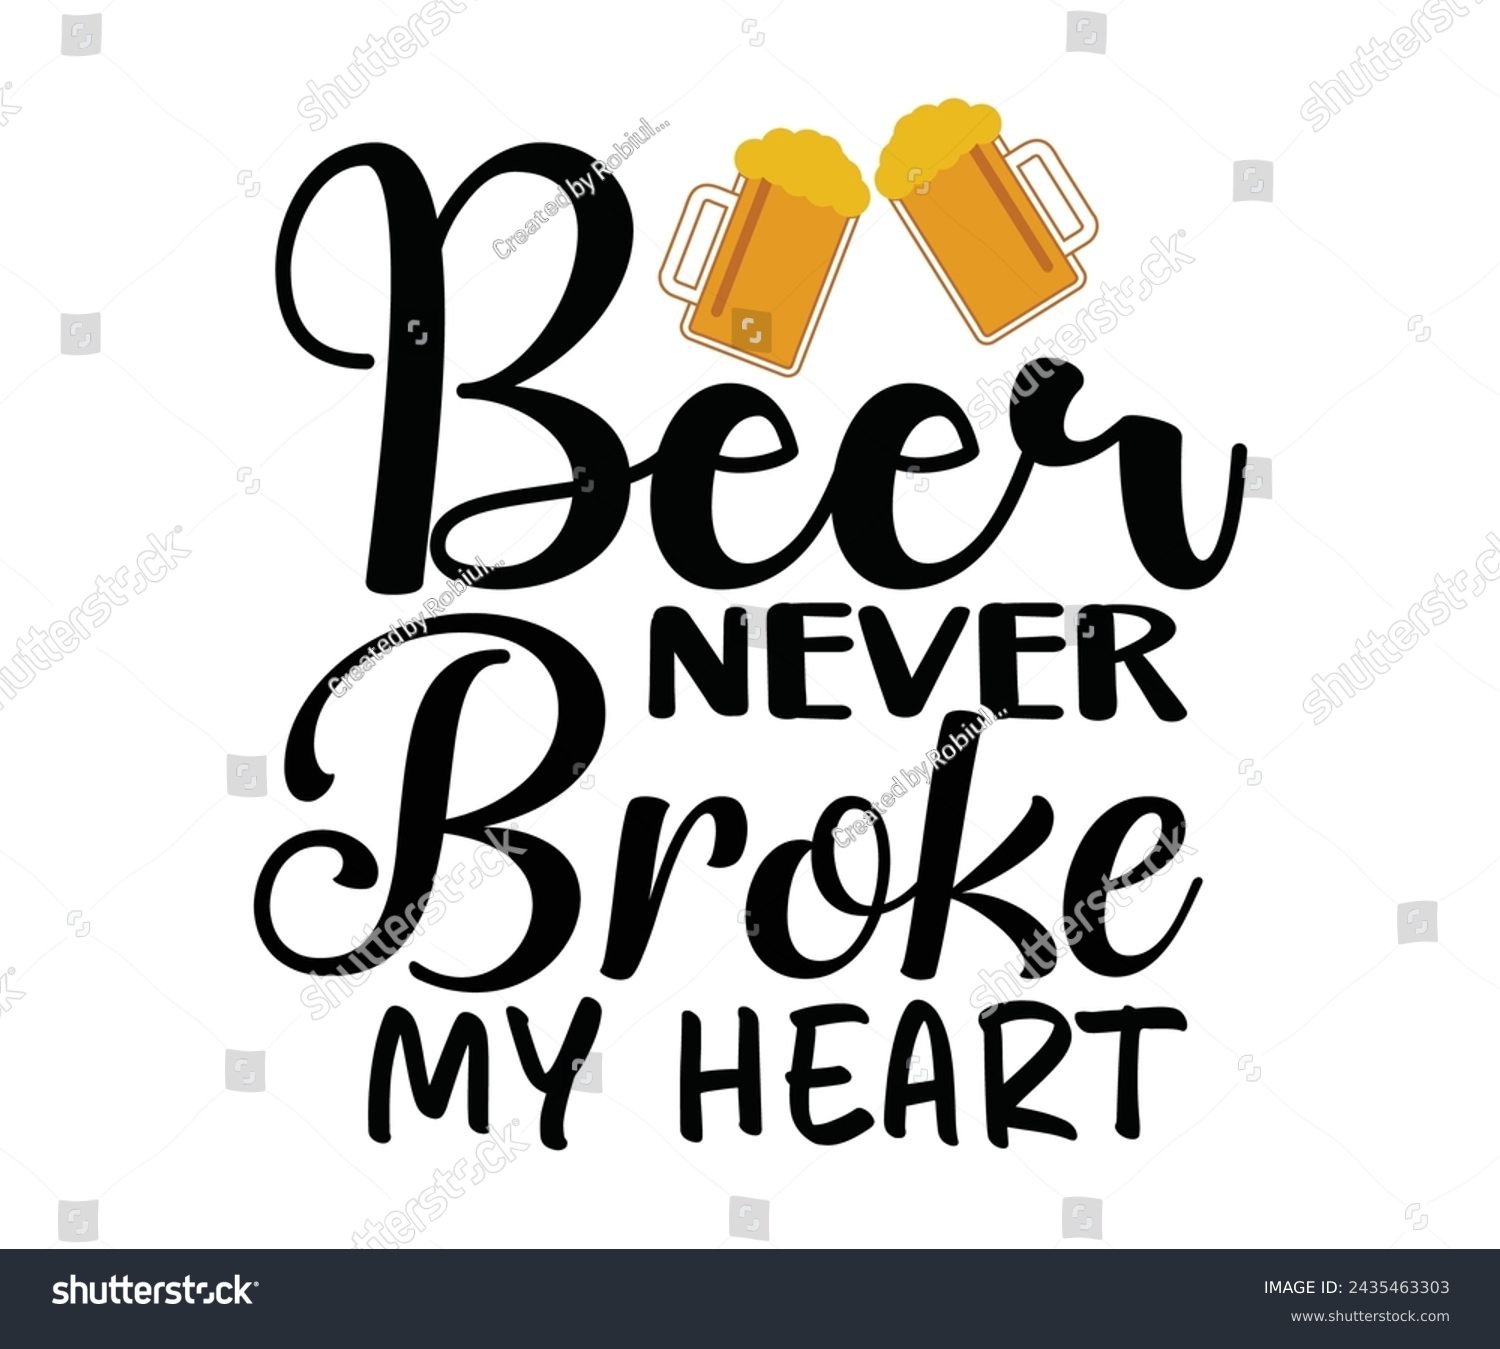 SVG of Beer Svg,Beer Quotes,Beer Lover Gift,Beer Girl Shirt,Craft Beer Lover,Beer Clothin,Beer Retro Shirt,Beer Mug,Funny Beer Lover Mug,Hopeful Beer Shirt,Gifts For Smoker,Cigars Gift,Lover Gift svg